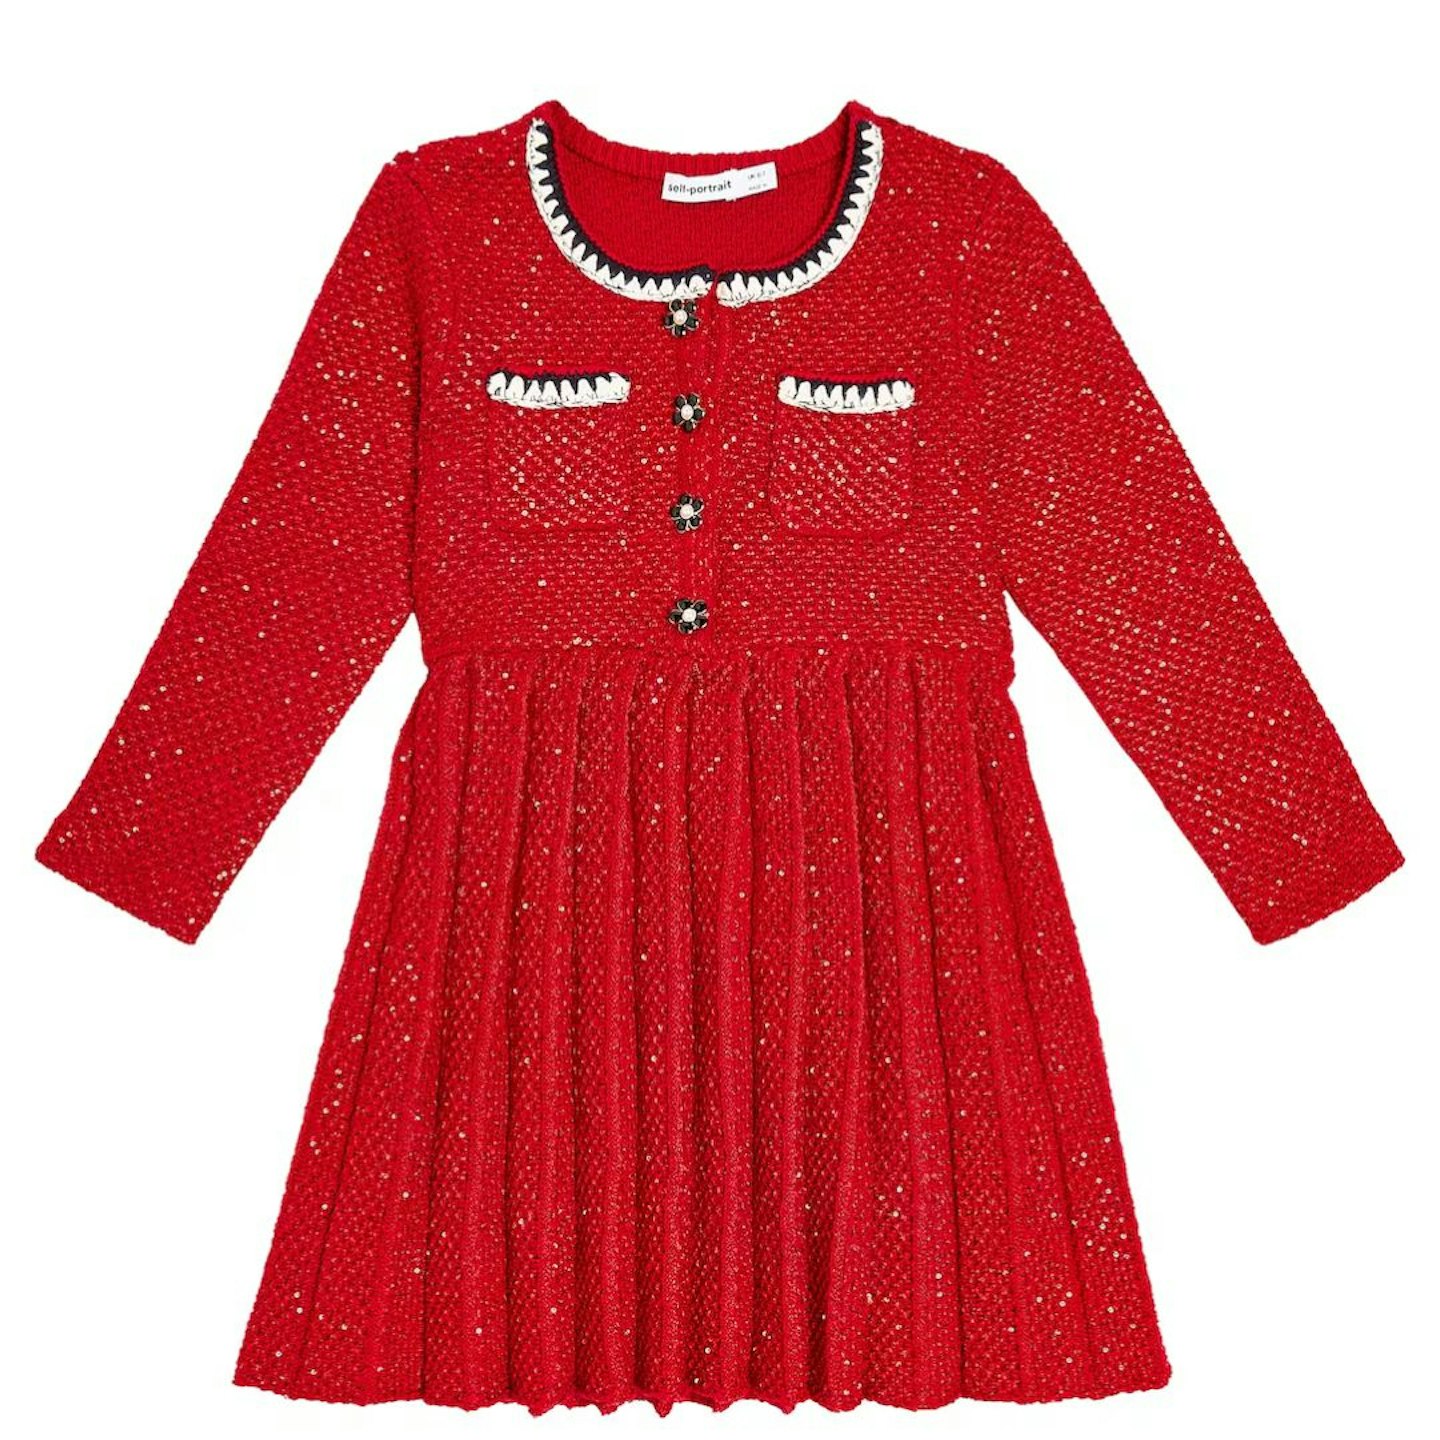 Best Christmas Day Outfits For Kids: Sequined knit dress